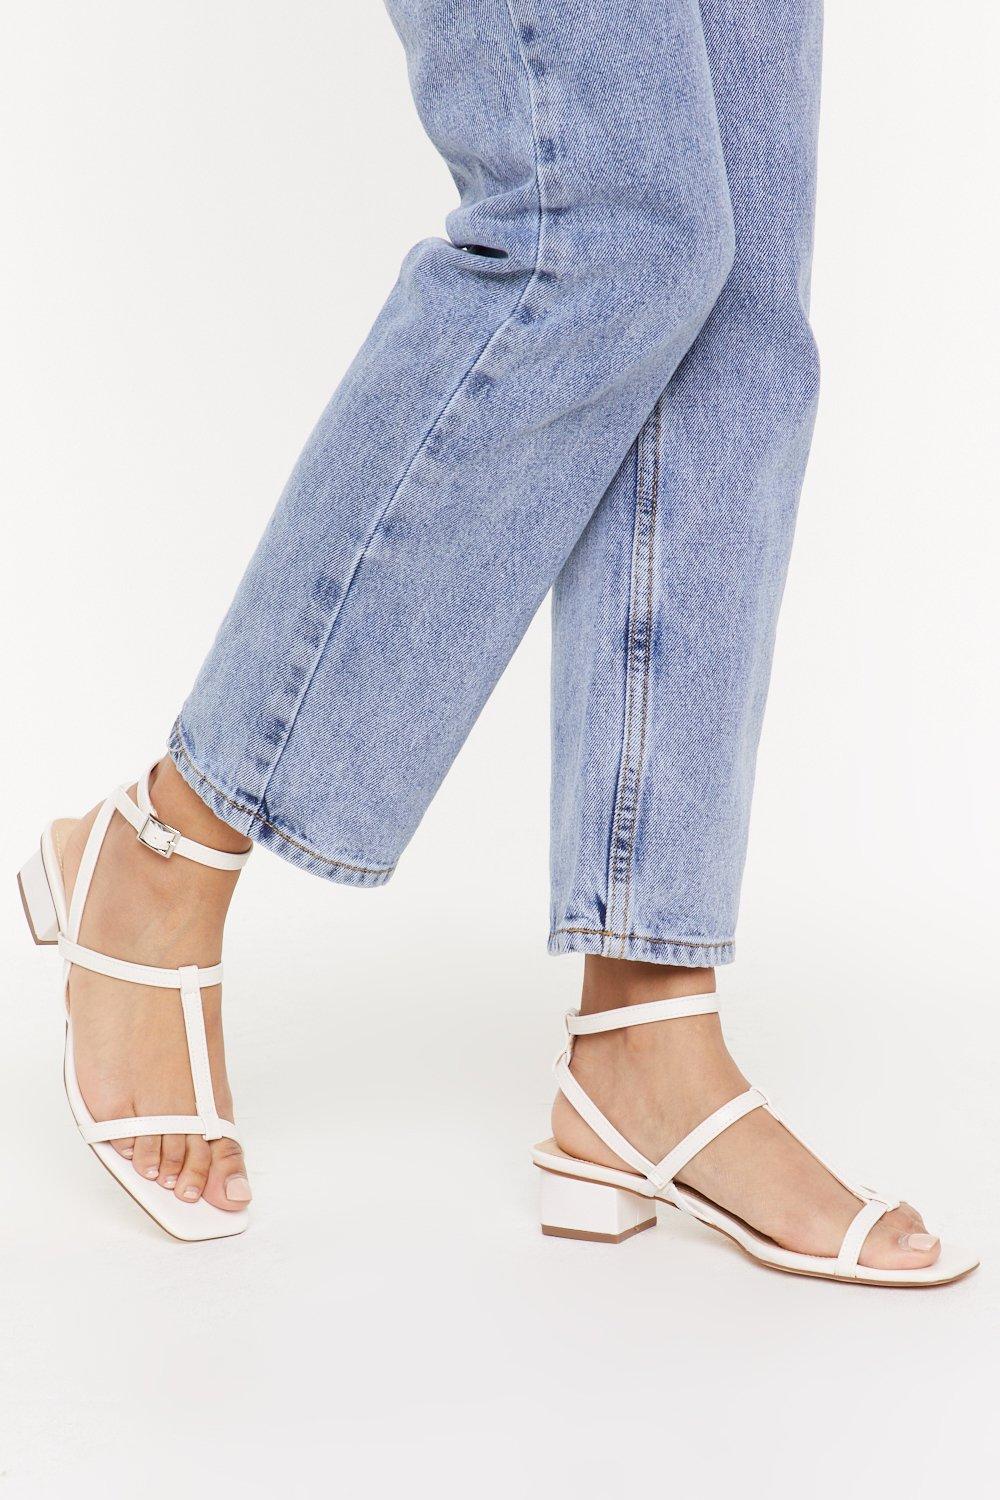 Square Toe Strappy Low Block Heels 